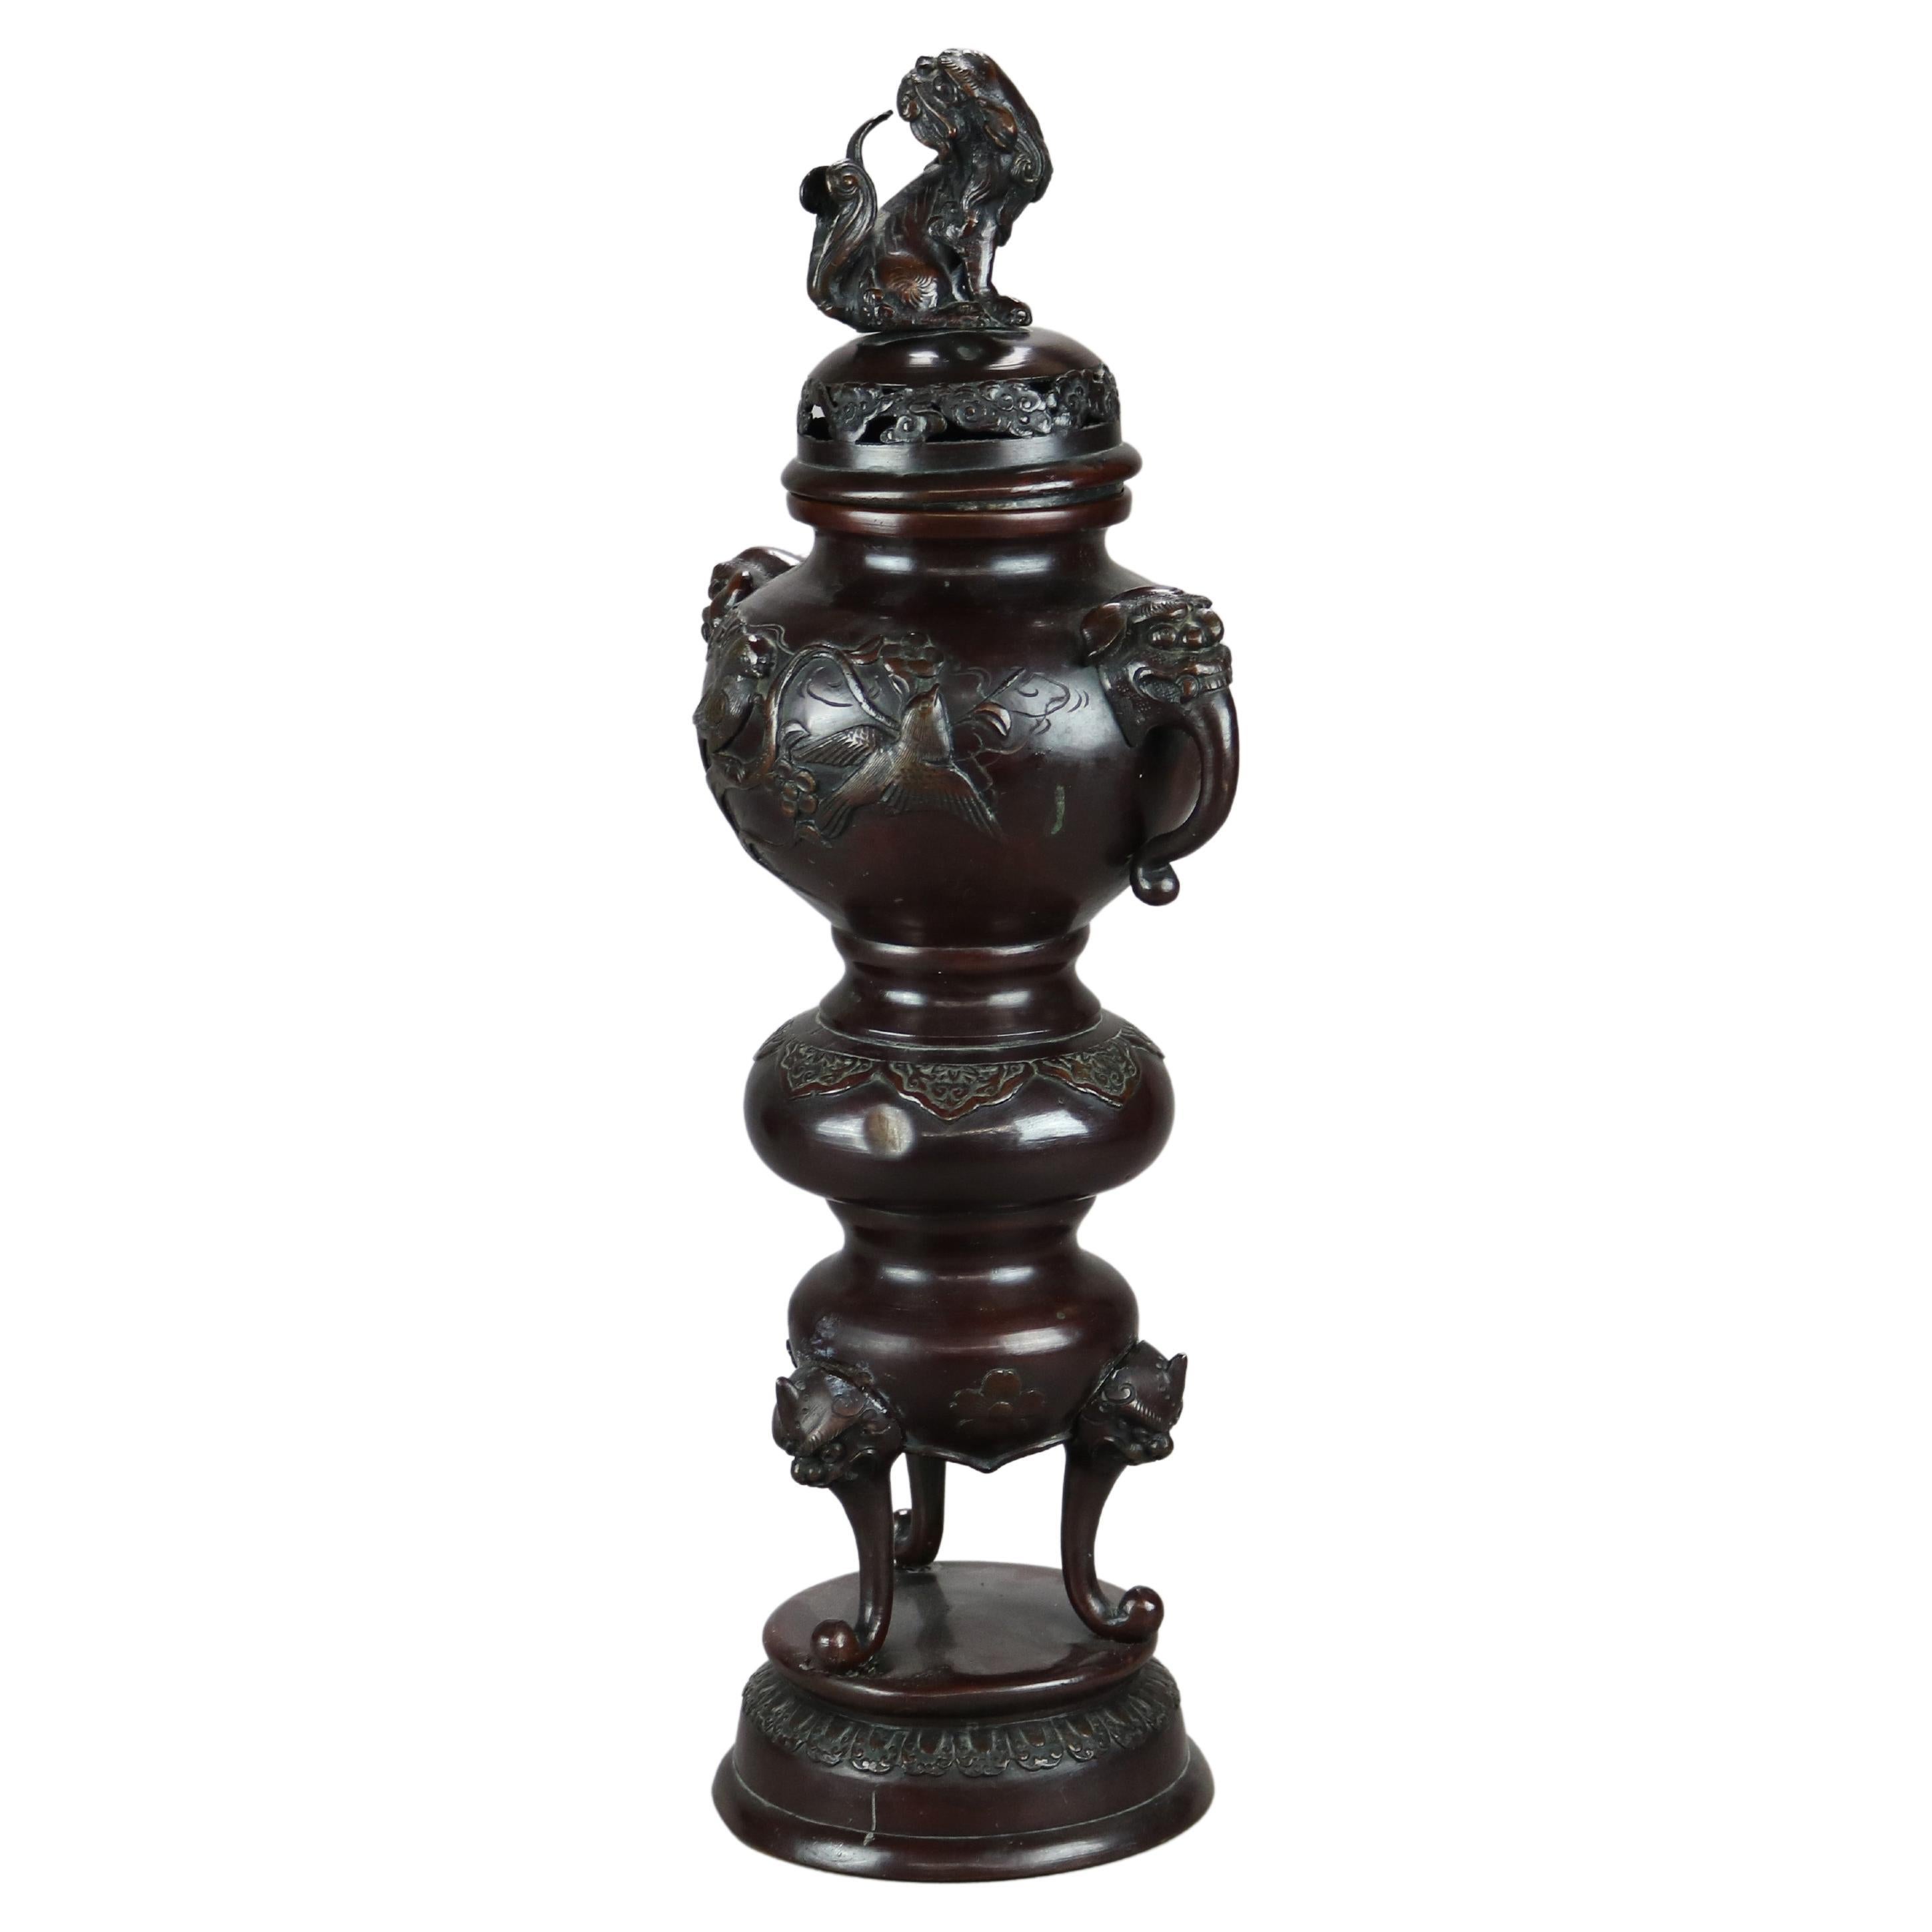 Antique Japanese Bronze Meiji Footed Censer with Figural Foo Dogs & Birds, 1900 For Sale